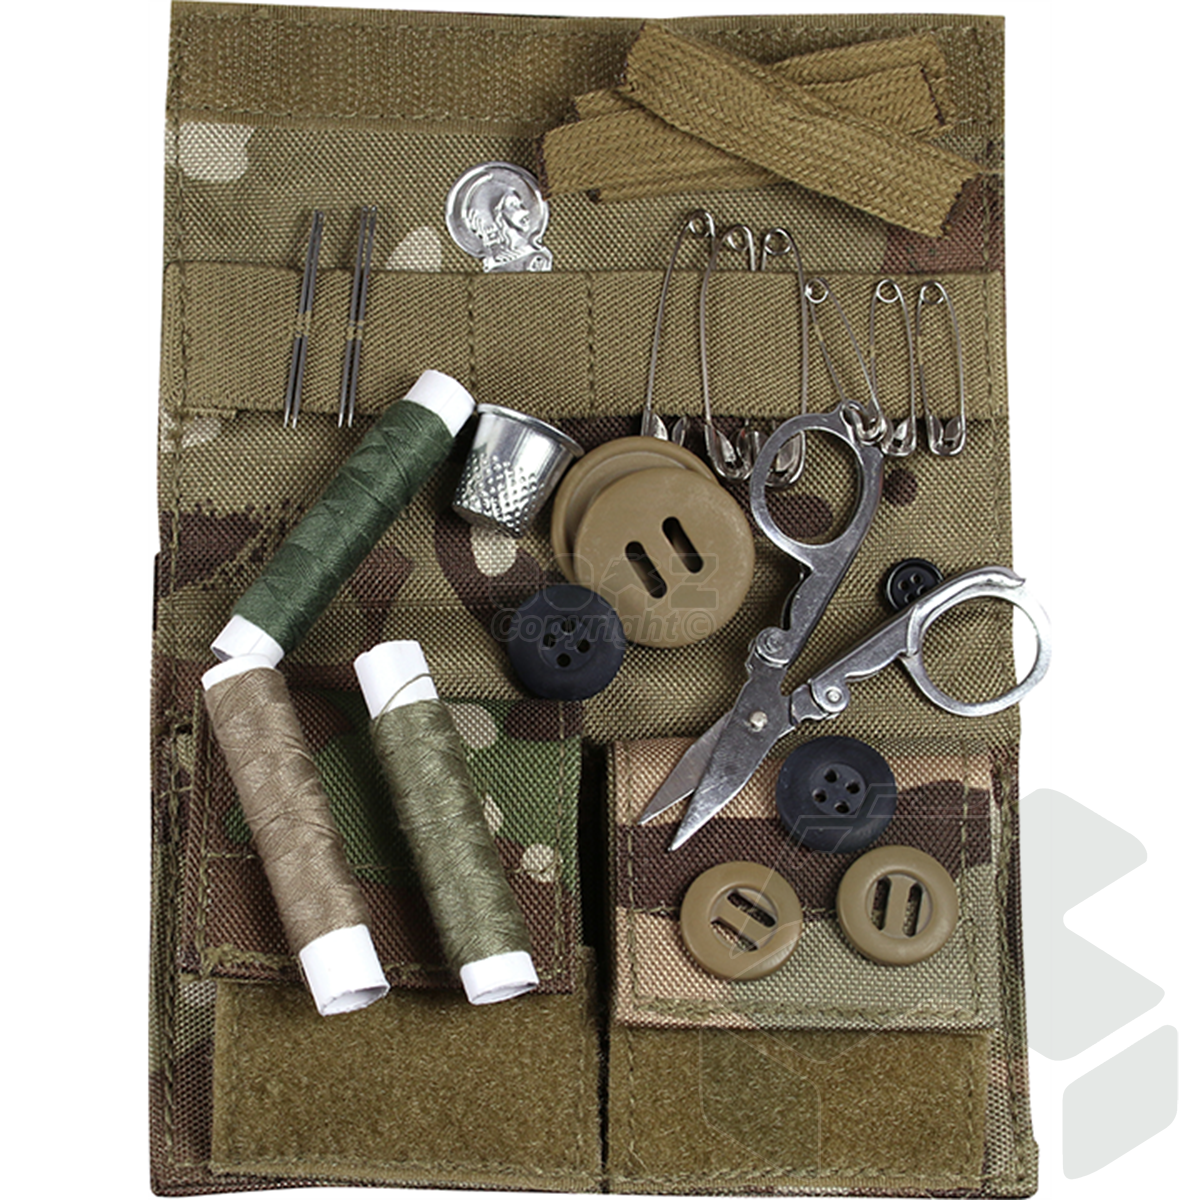 Web-Tex Soldier 95 Sewing Kit - Camo